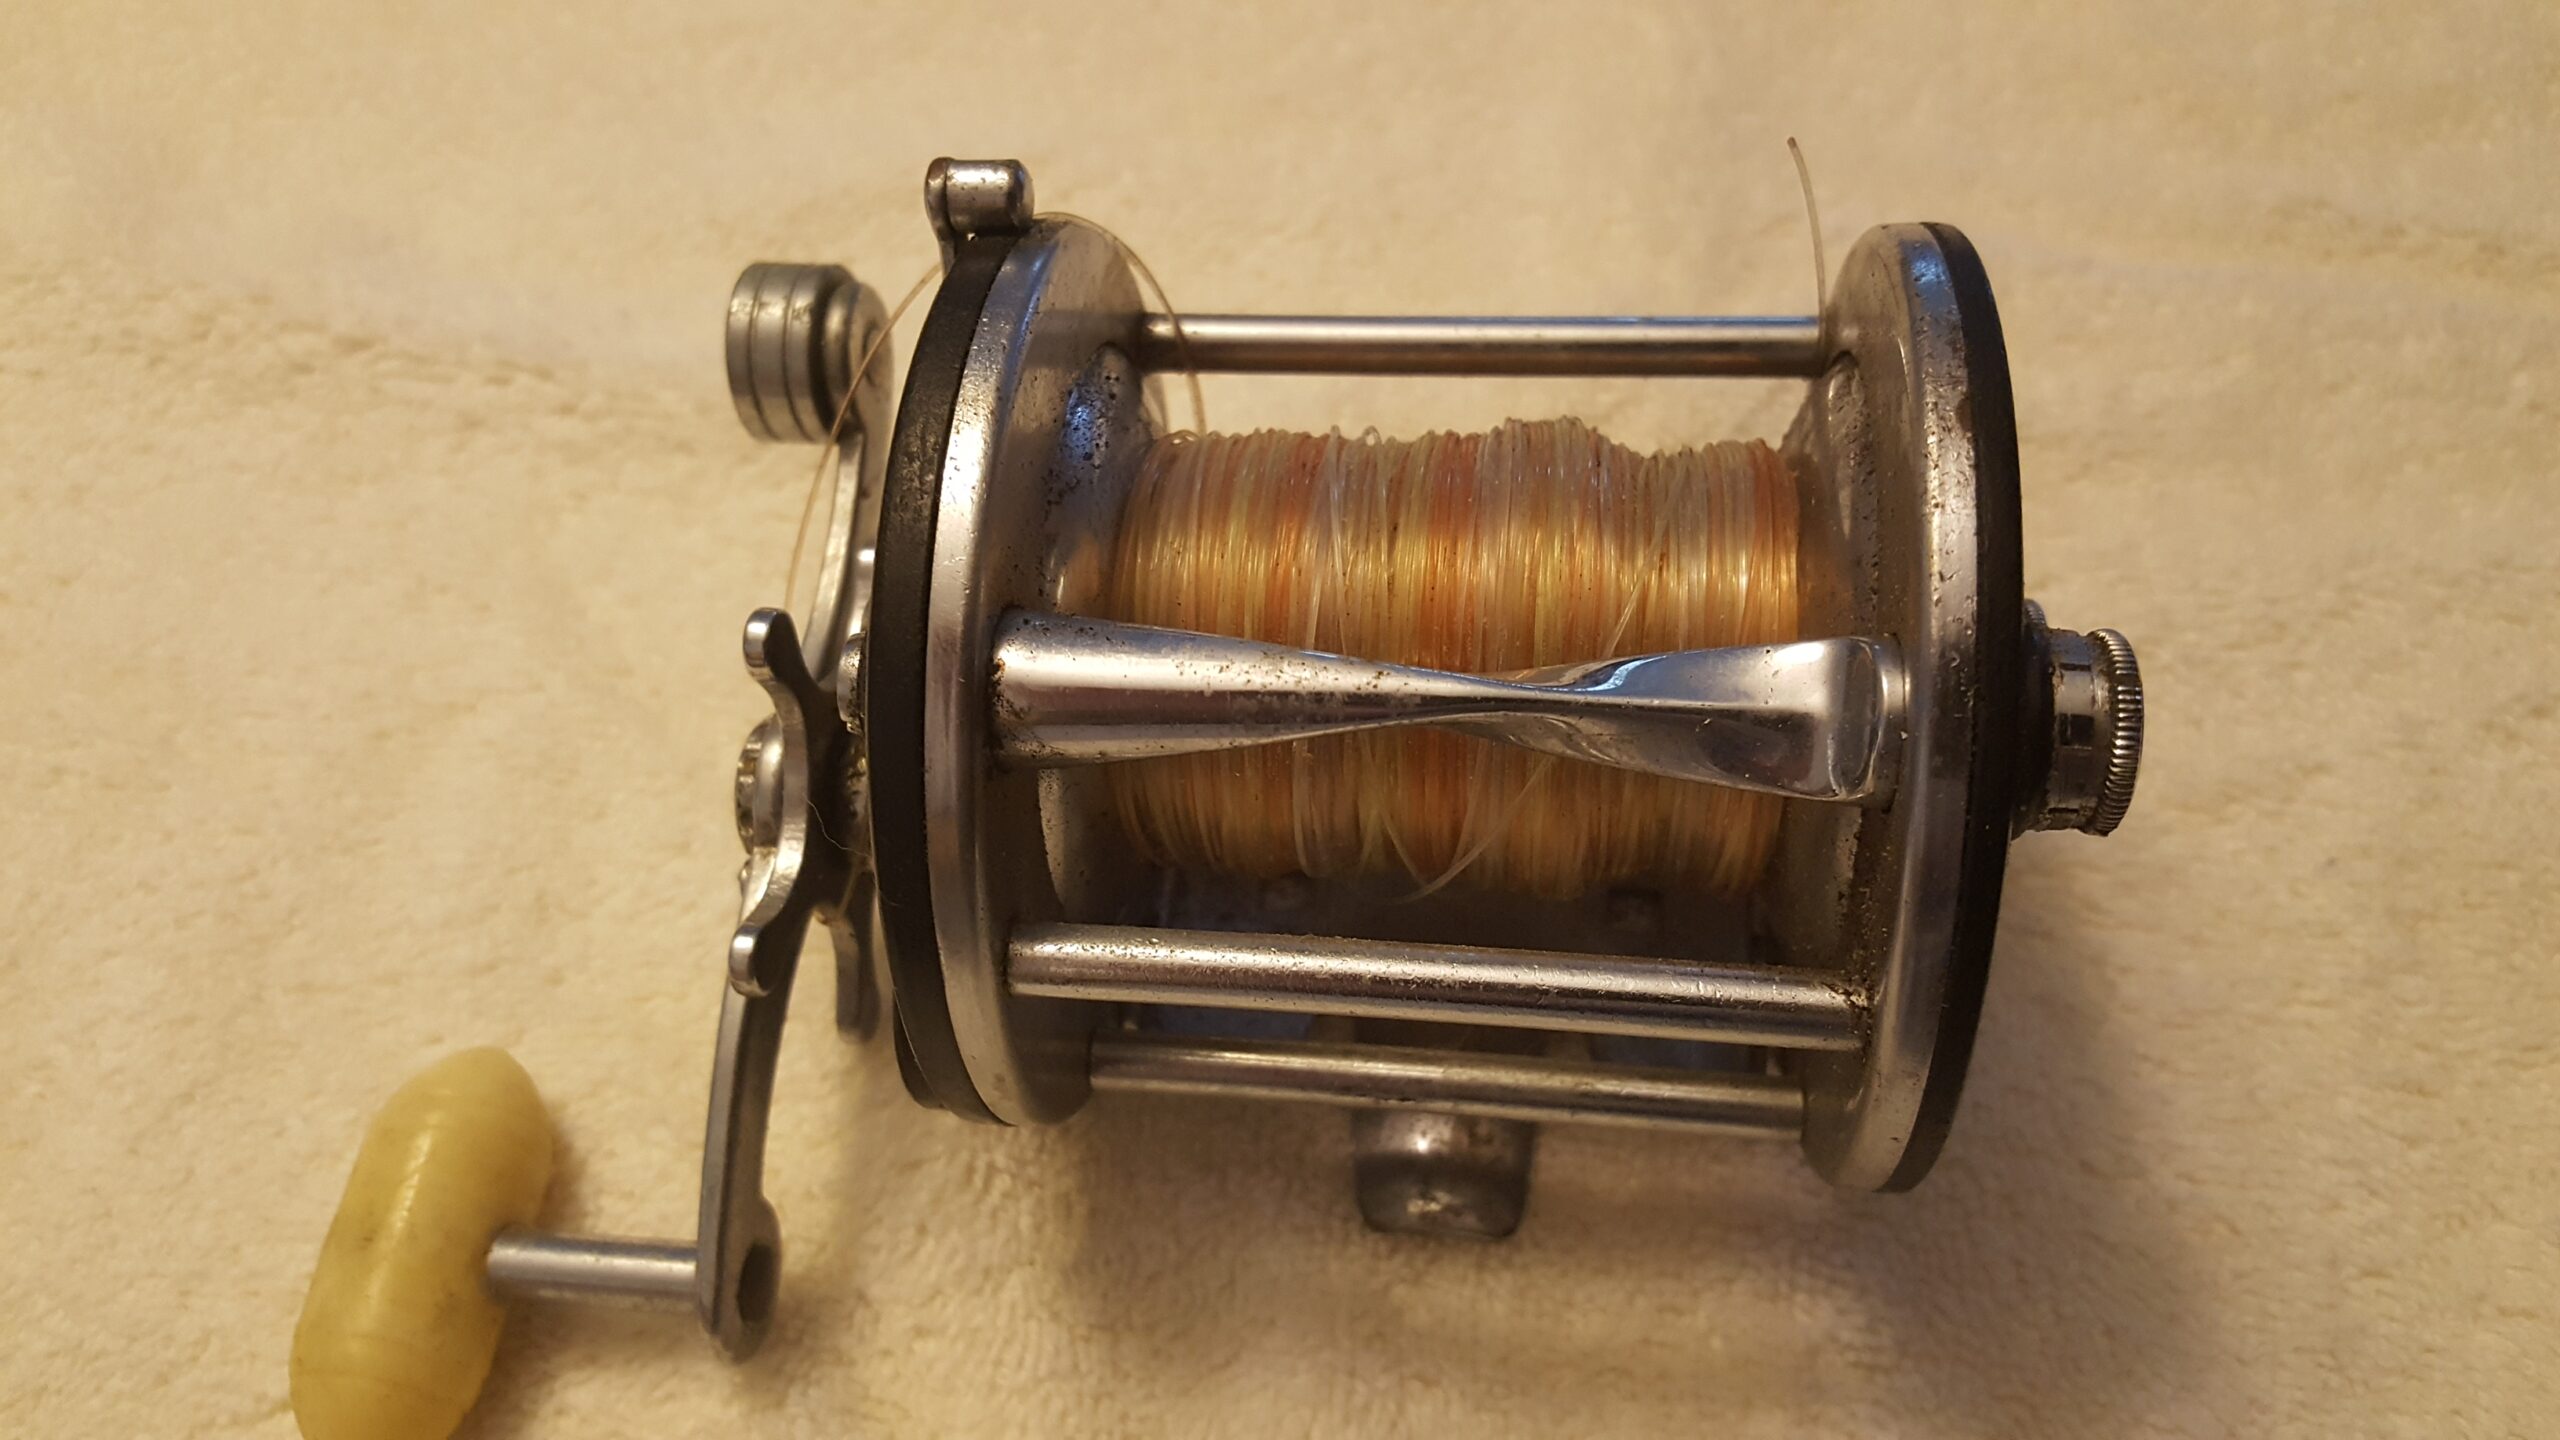 60 year old Penn Reel and it still fishes